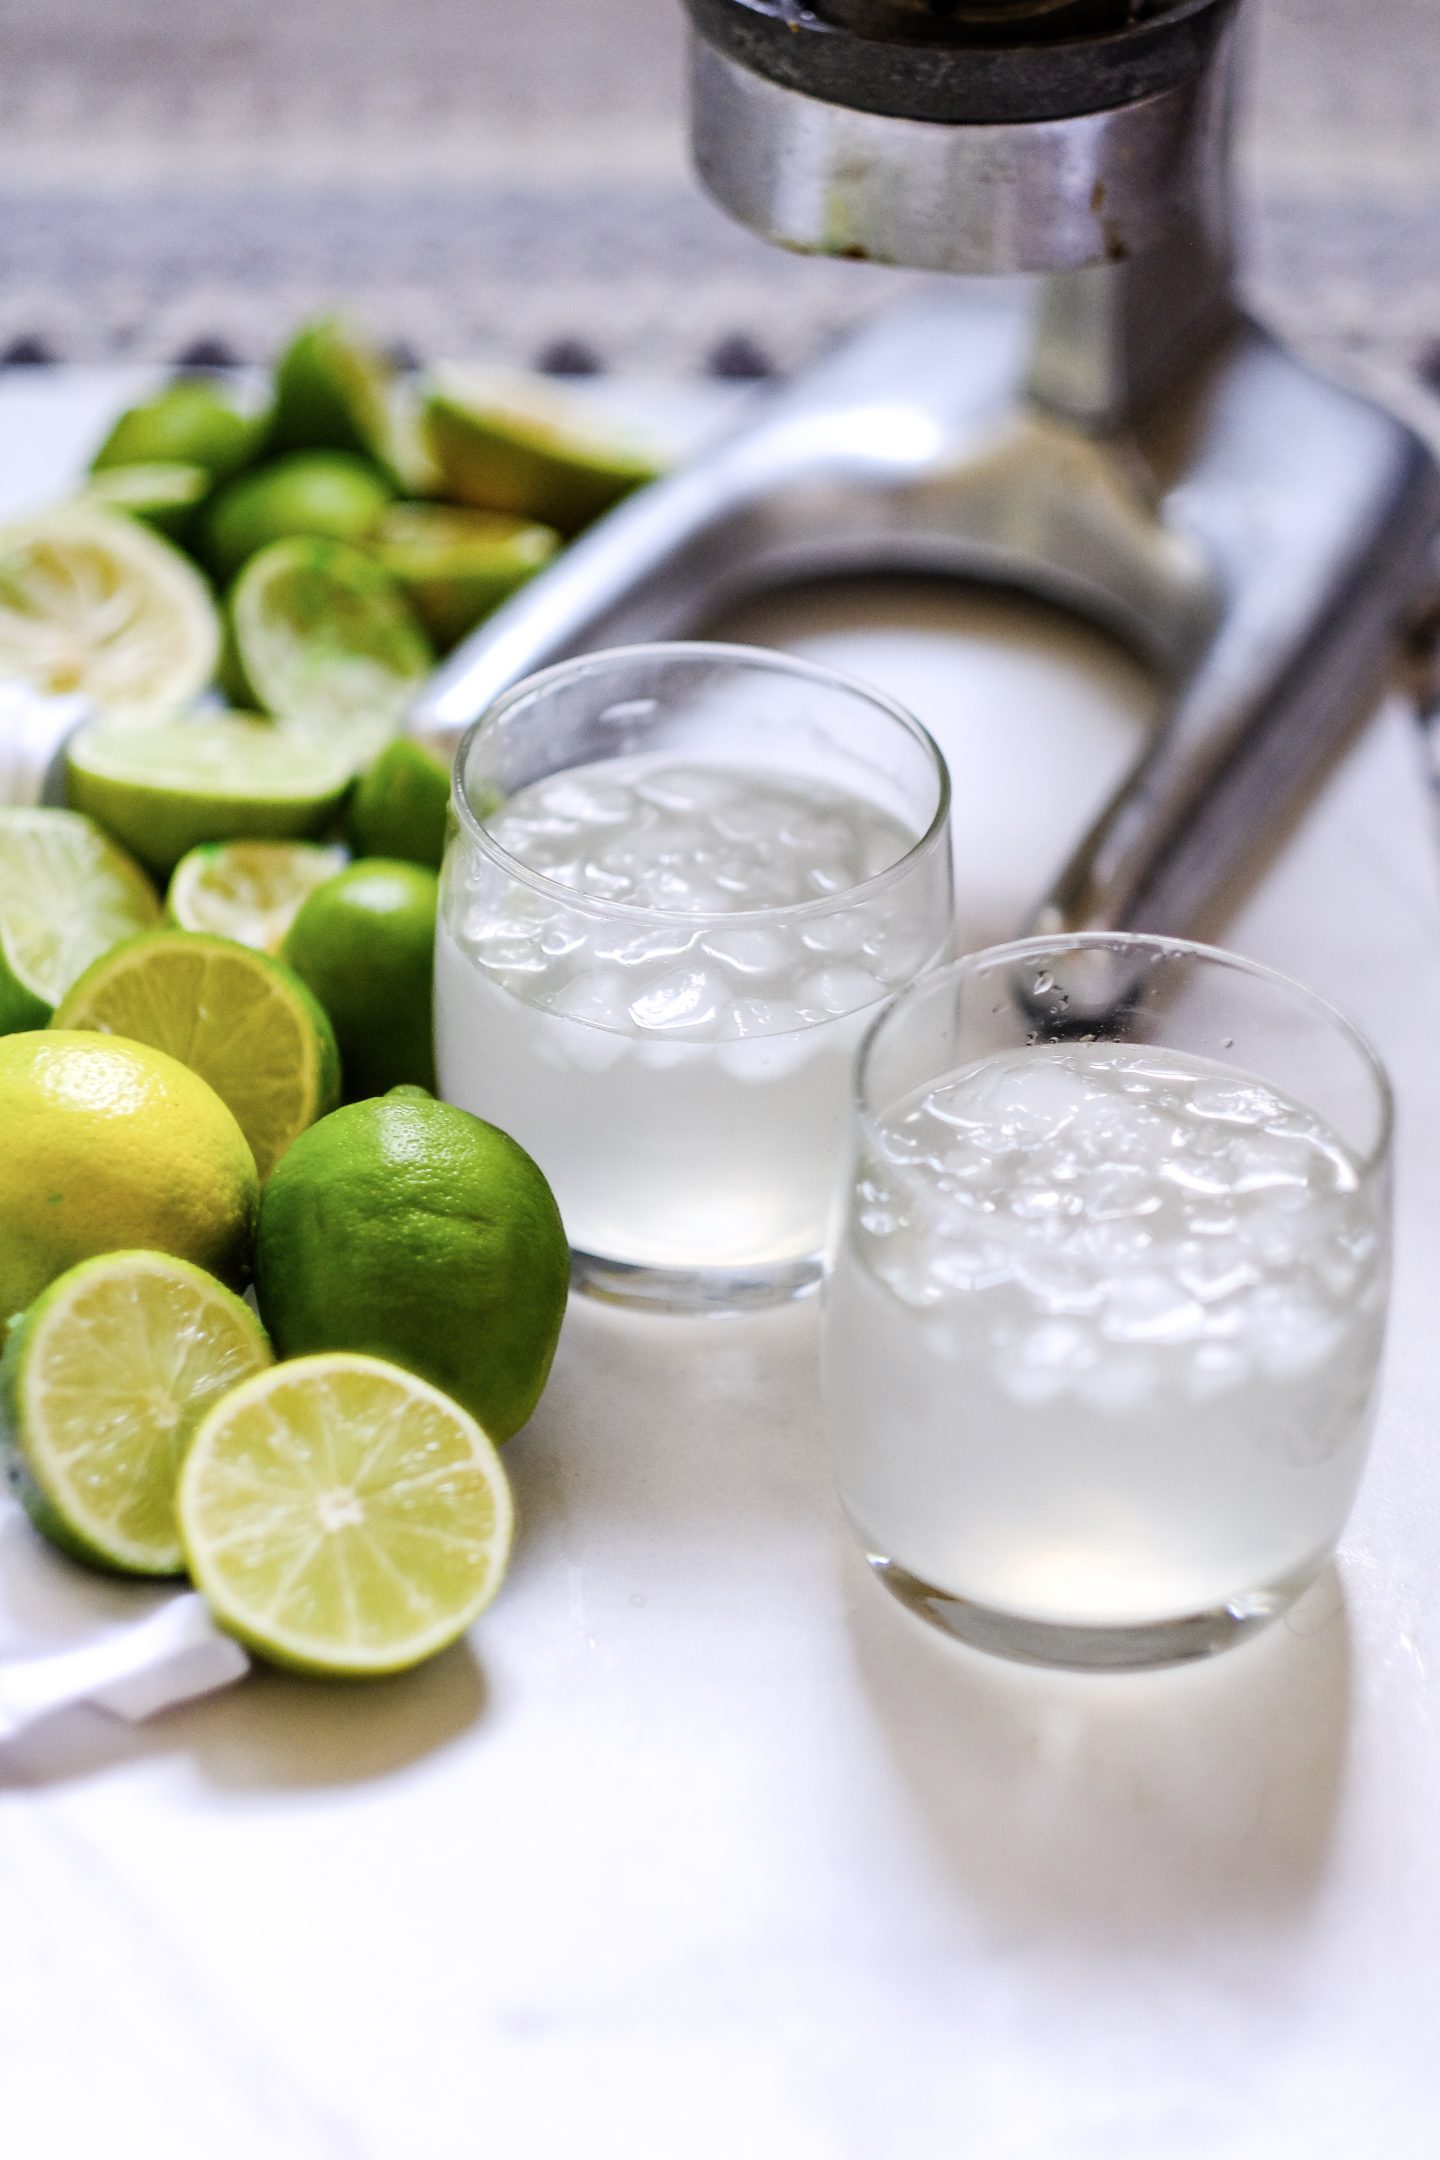 Lifestyle Blogger Jenny Meassick of Chocolate and Lace shares her recipe for Fresh Squeezed Limeade